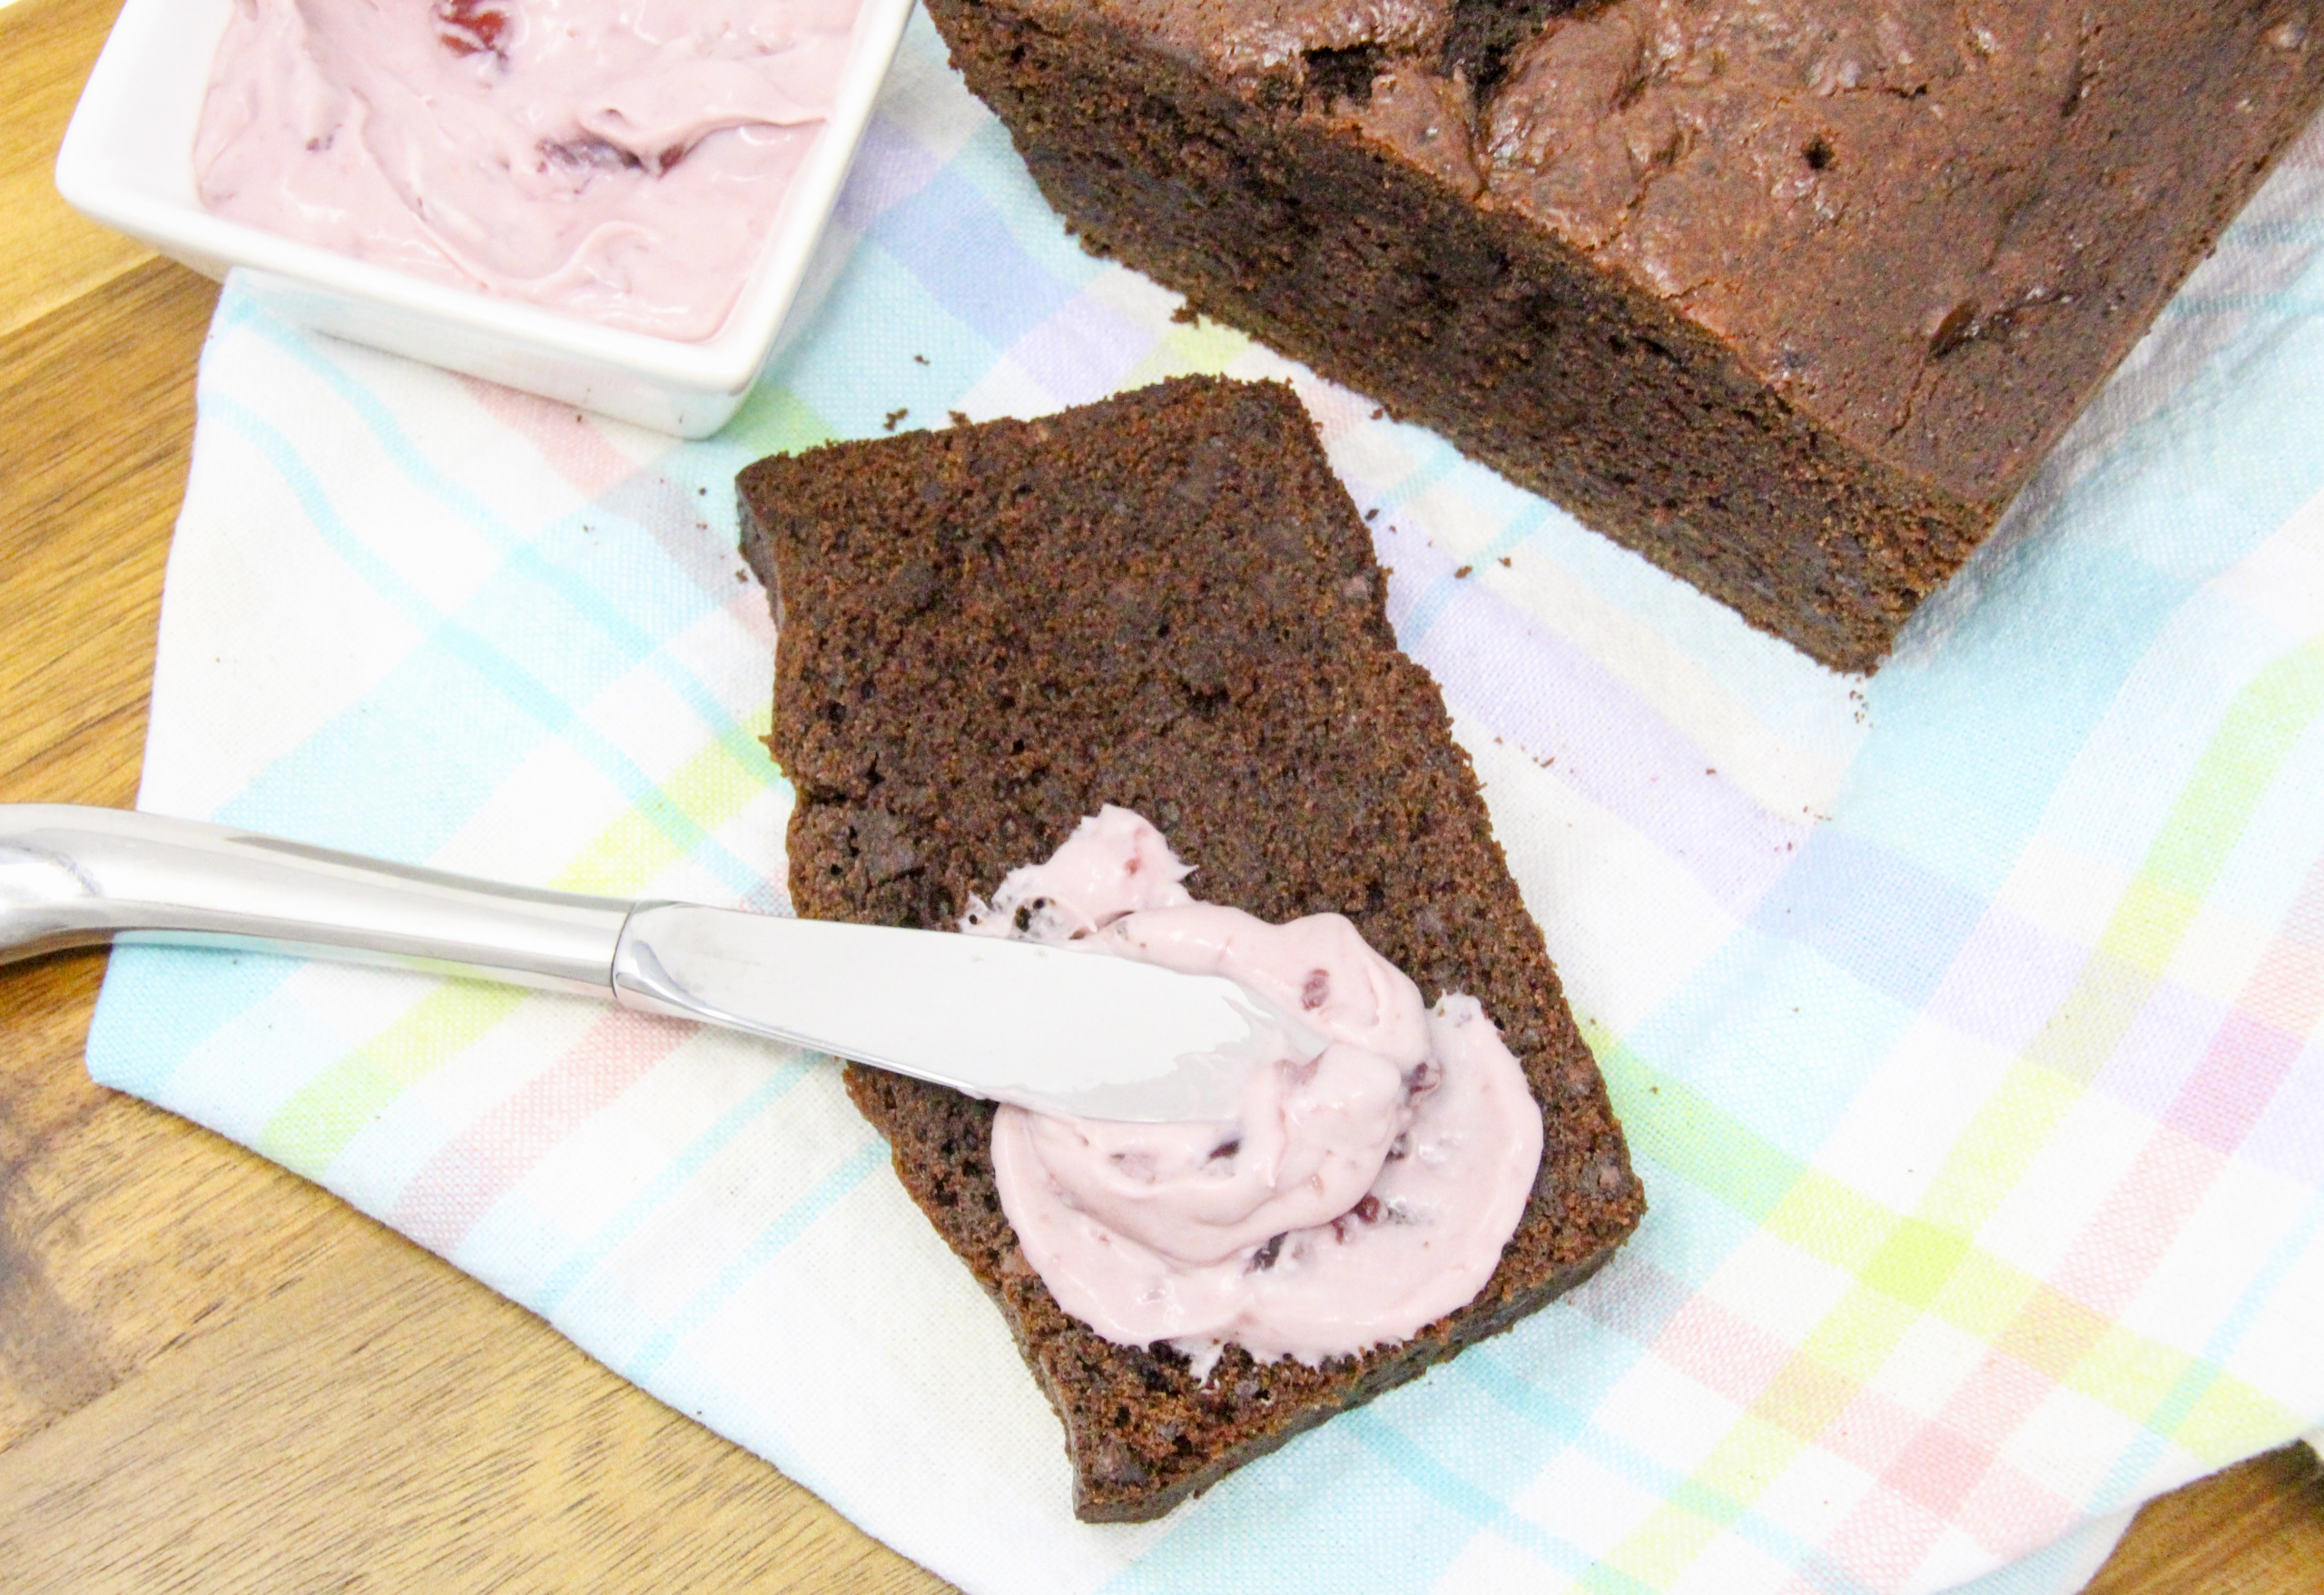 Super rich and super chocolaty, Gluten-Free Chocolate Loaf with Cherry Mascarpone Filling (or spread) ratcheted up the yum factor! A delectable treat for brunch, afternoon tea, or for anytime you feel like spoiling yourself! Recipe shared with permission granted by Libby Klein, author of BEAUTY EXPOS ARE MURDER.